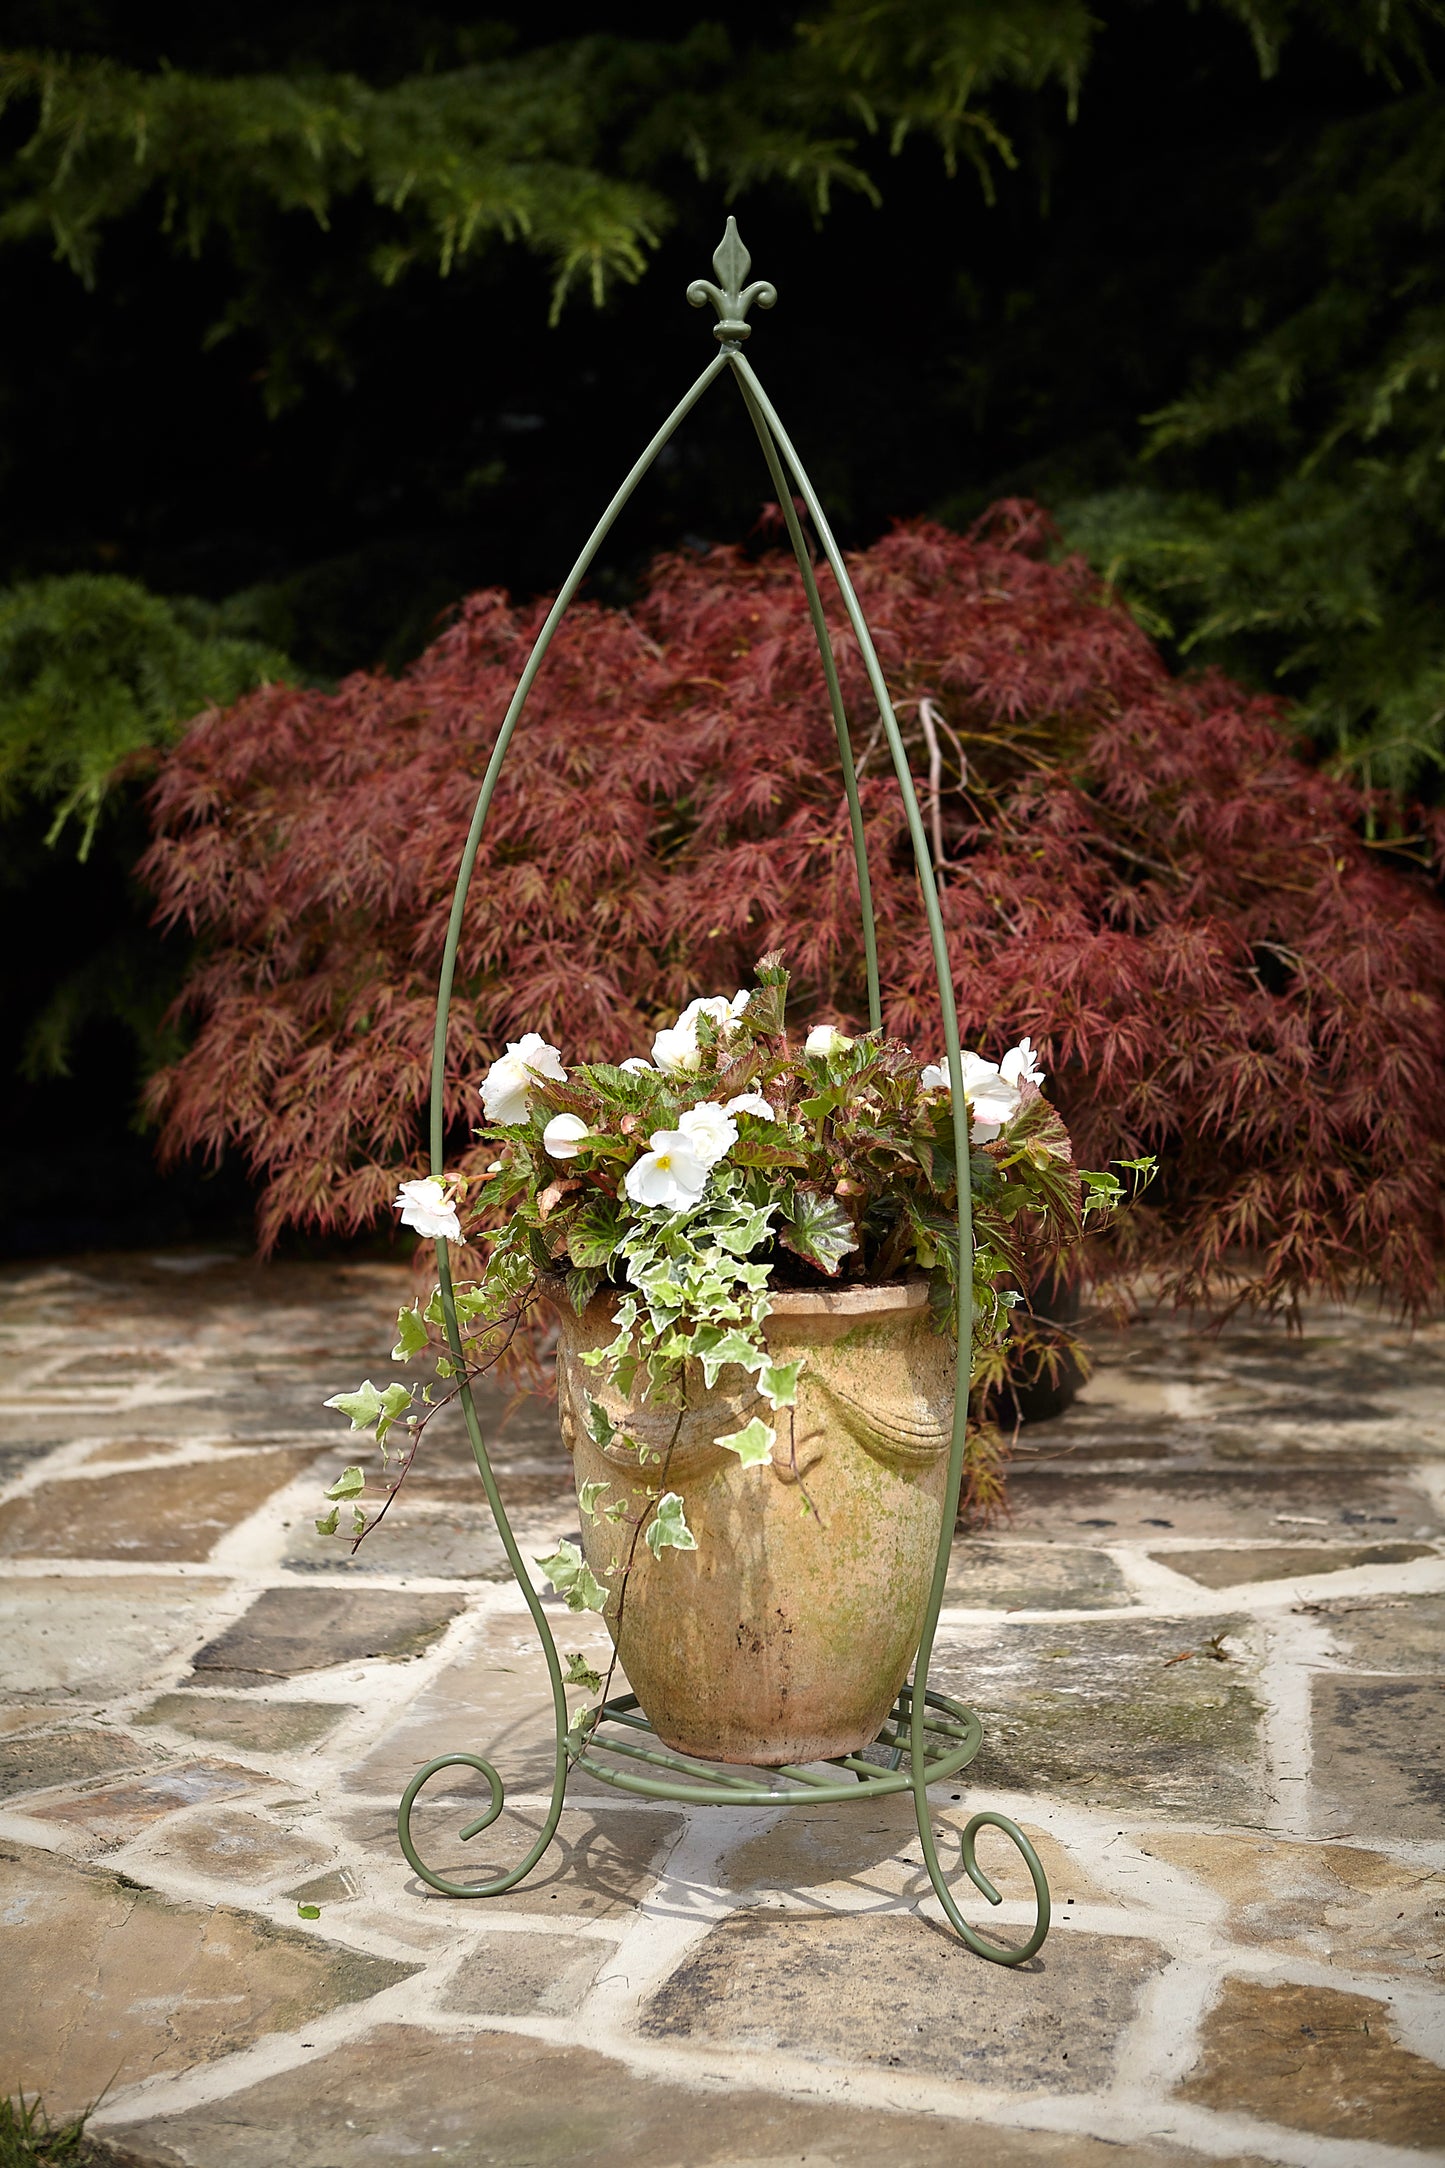 Tom Chambers Fiore Obelisk Plant Stand